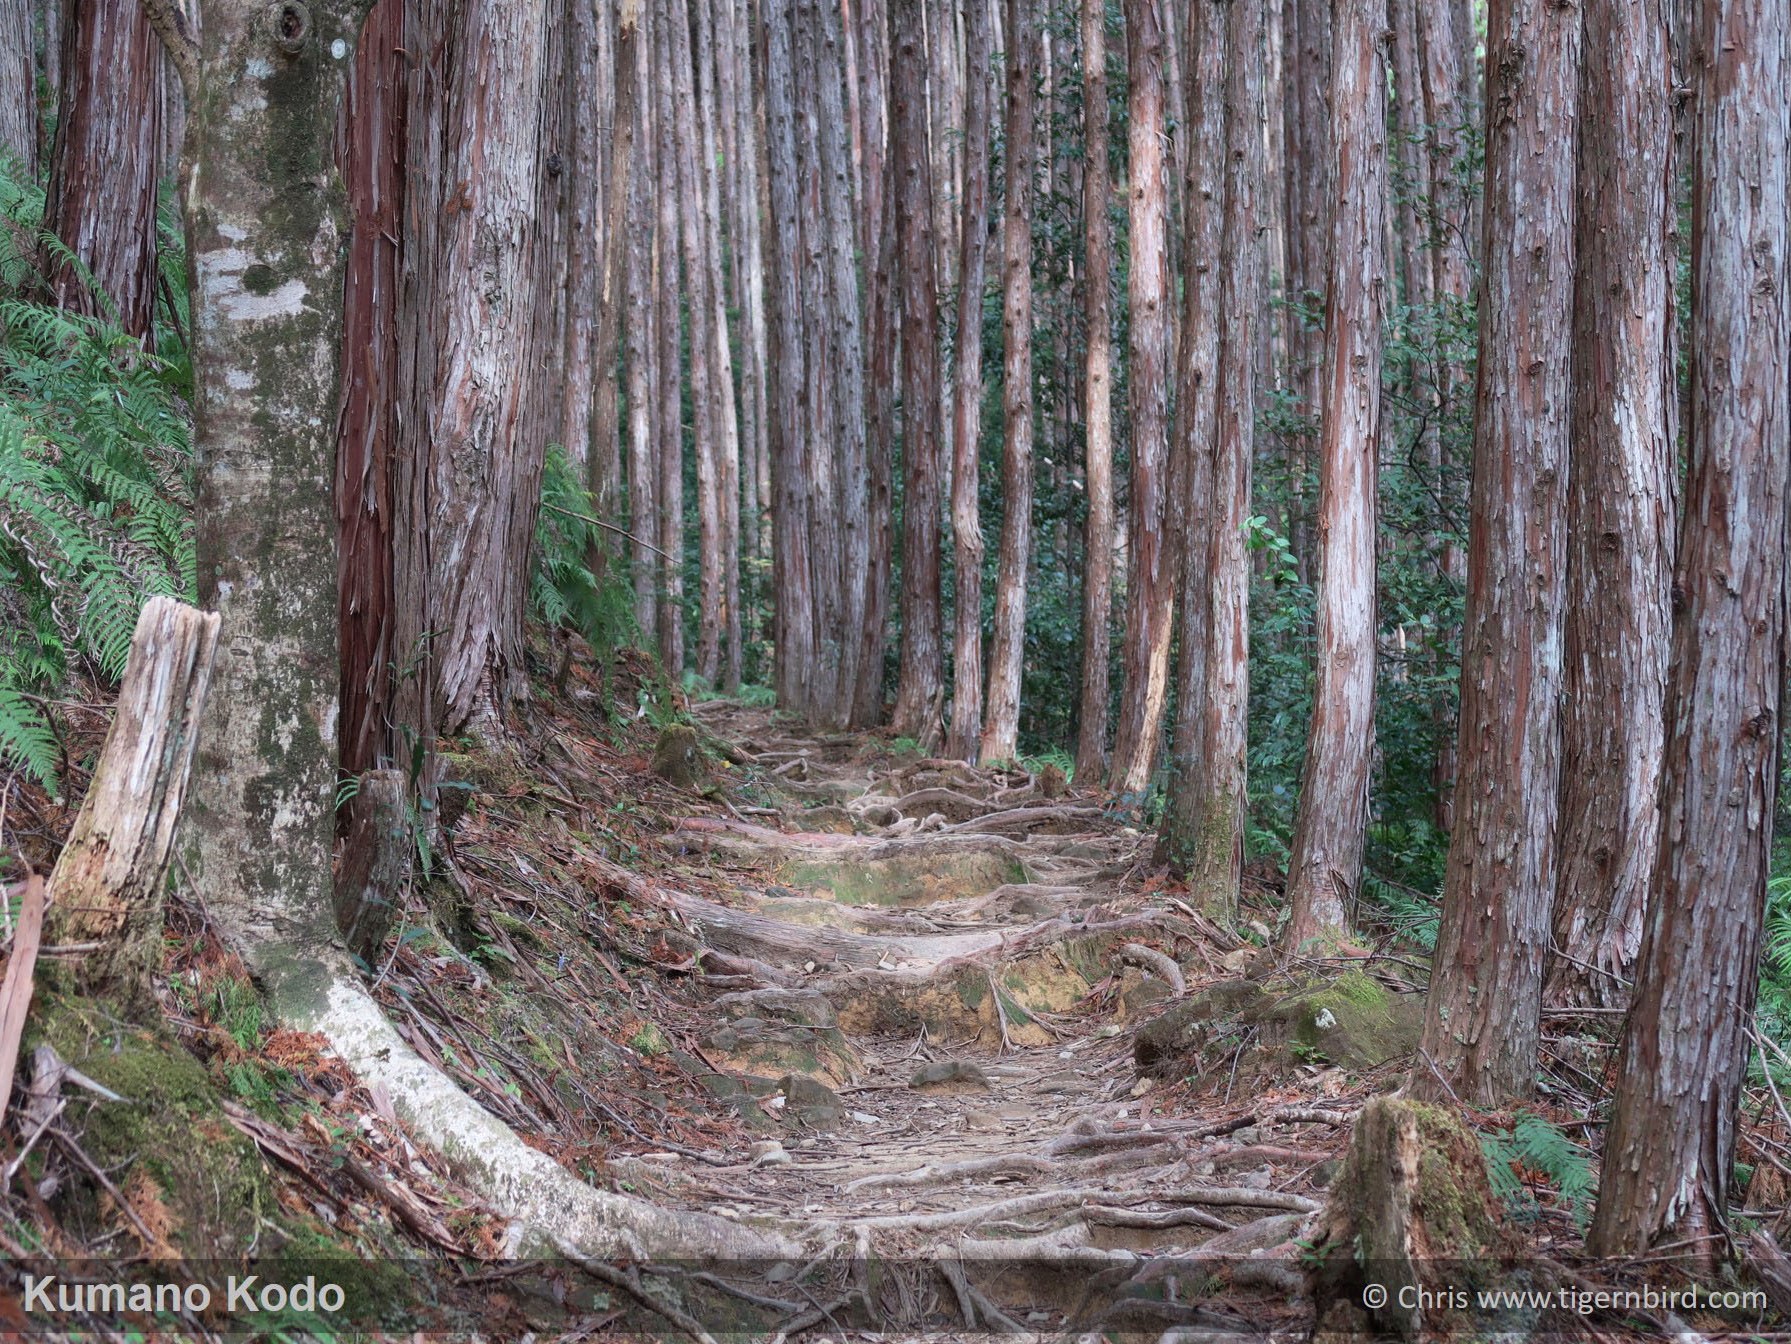 Dense trees around path covered with roots on the Kumano Kodo trail in Japan